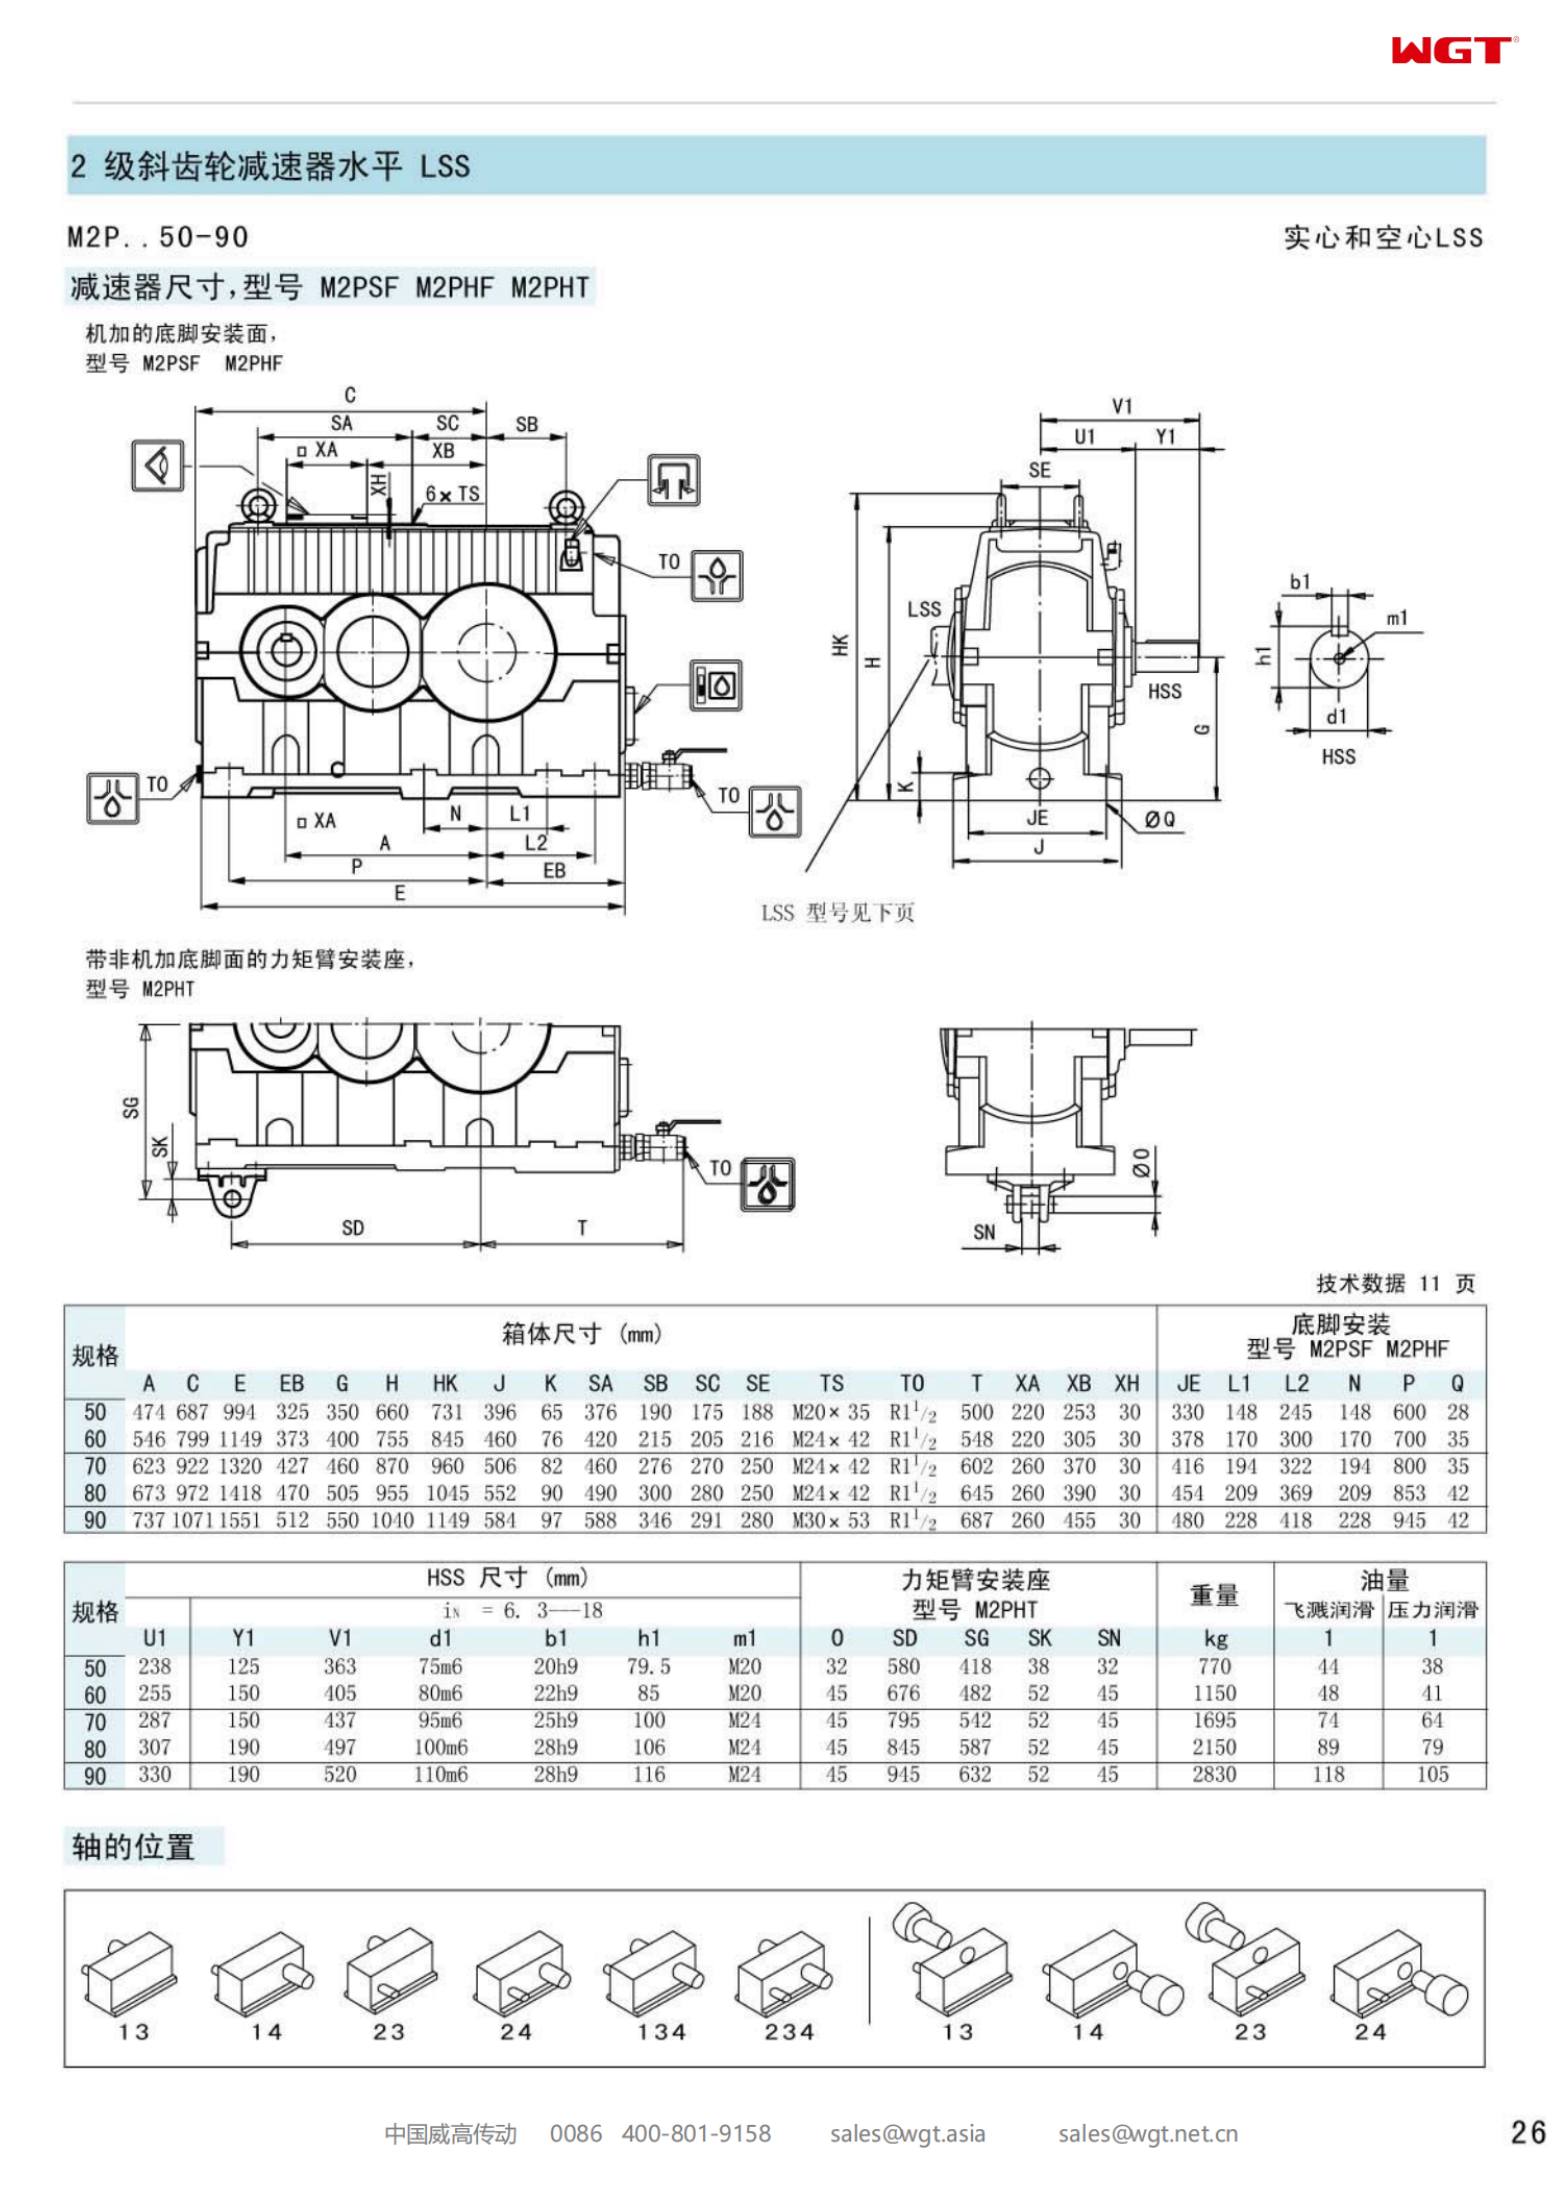 M2PSF90 Replace_SEW_M_Series Gearbox